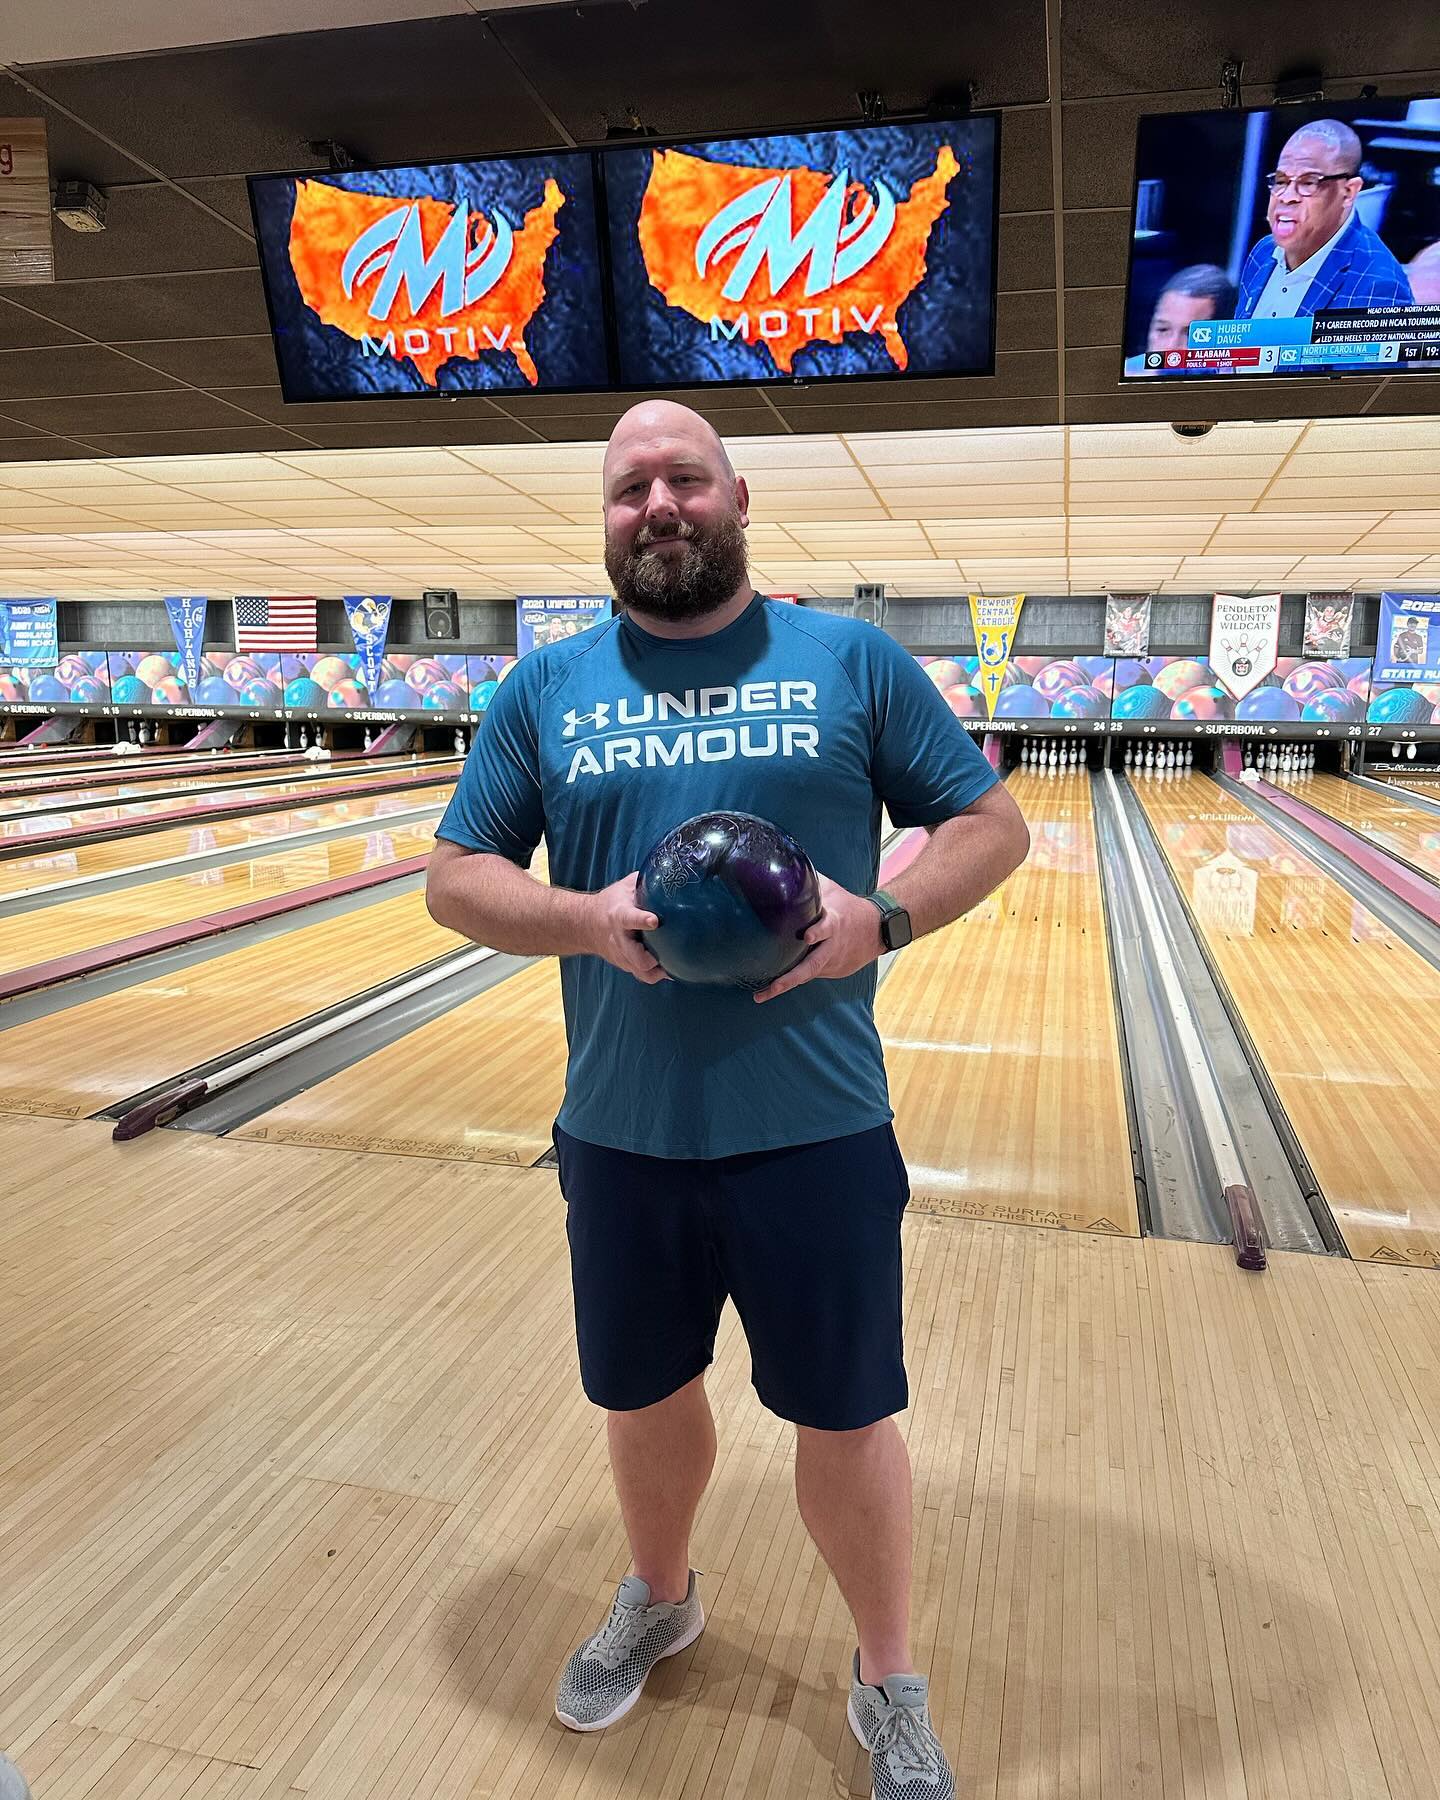 End of the 2023/2024 @igbobowling season. Had a great time seeing old friends and making new ones. Can’t wait for the few tournaments I have this summer. 
#bearlove #bearstagram #hairyscruffhomo #hairyscruff #stockybears #beardedhomo #hairybearlife #hairybeardedcub #gaybear #gaybearded #gaycub #beardedgay #instagay #gay #bearsofinstagram #cubsofinstagram #hairychest #gaysofinstagram #scruff #bear #hairy #fur